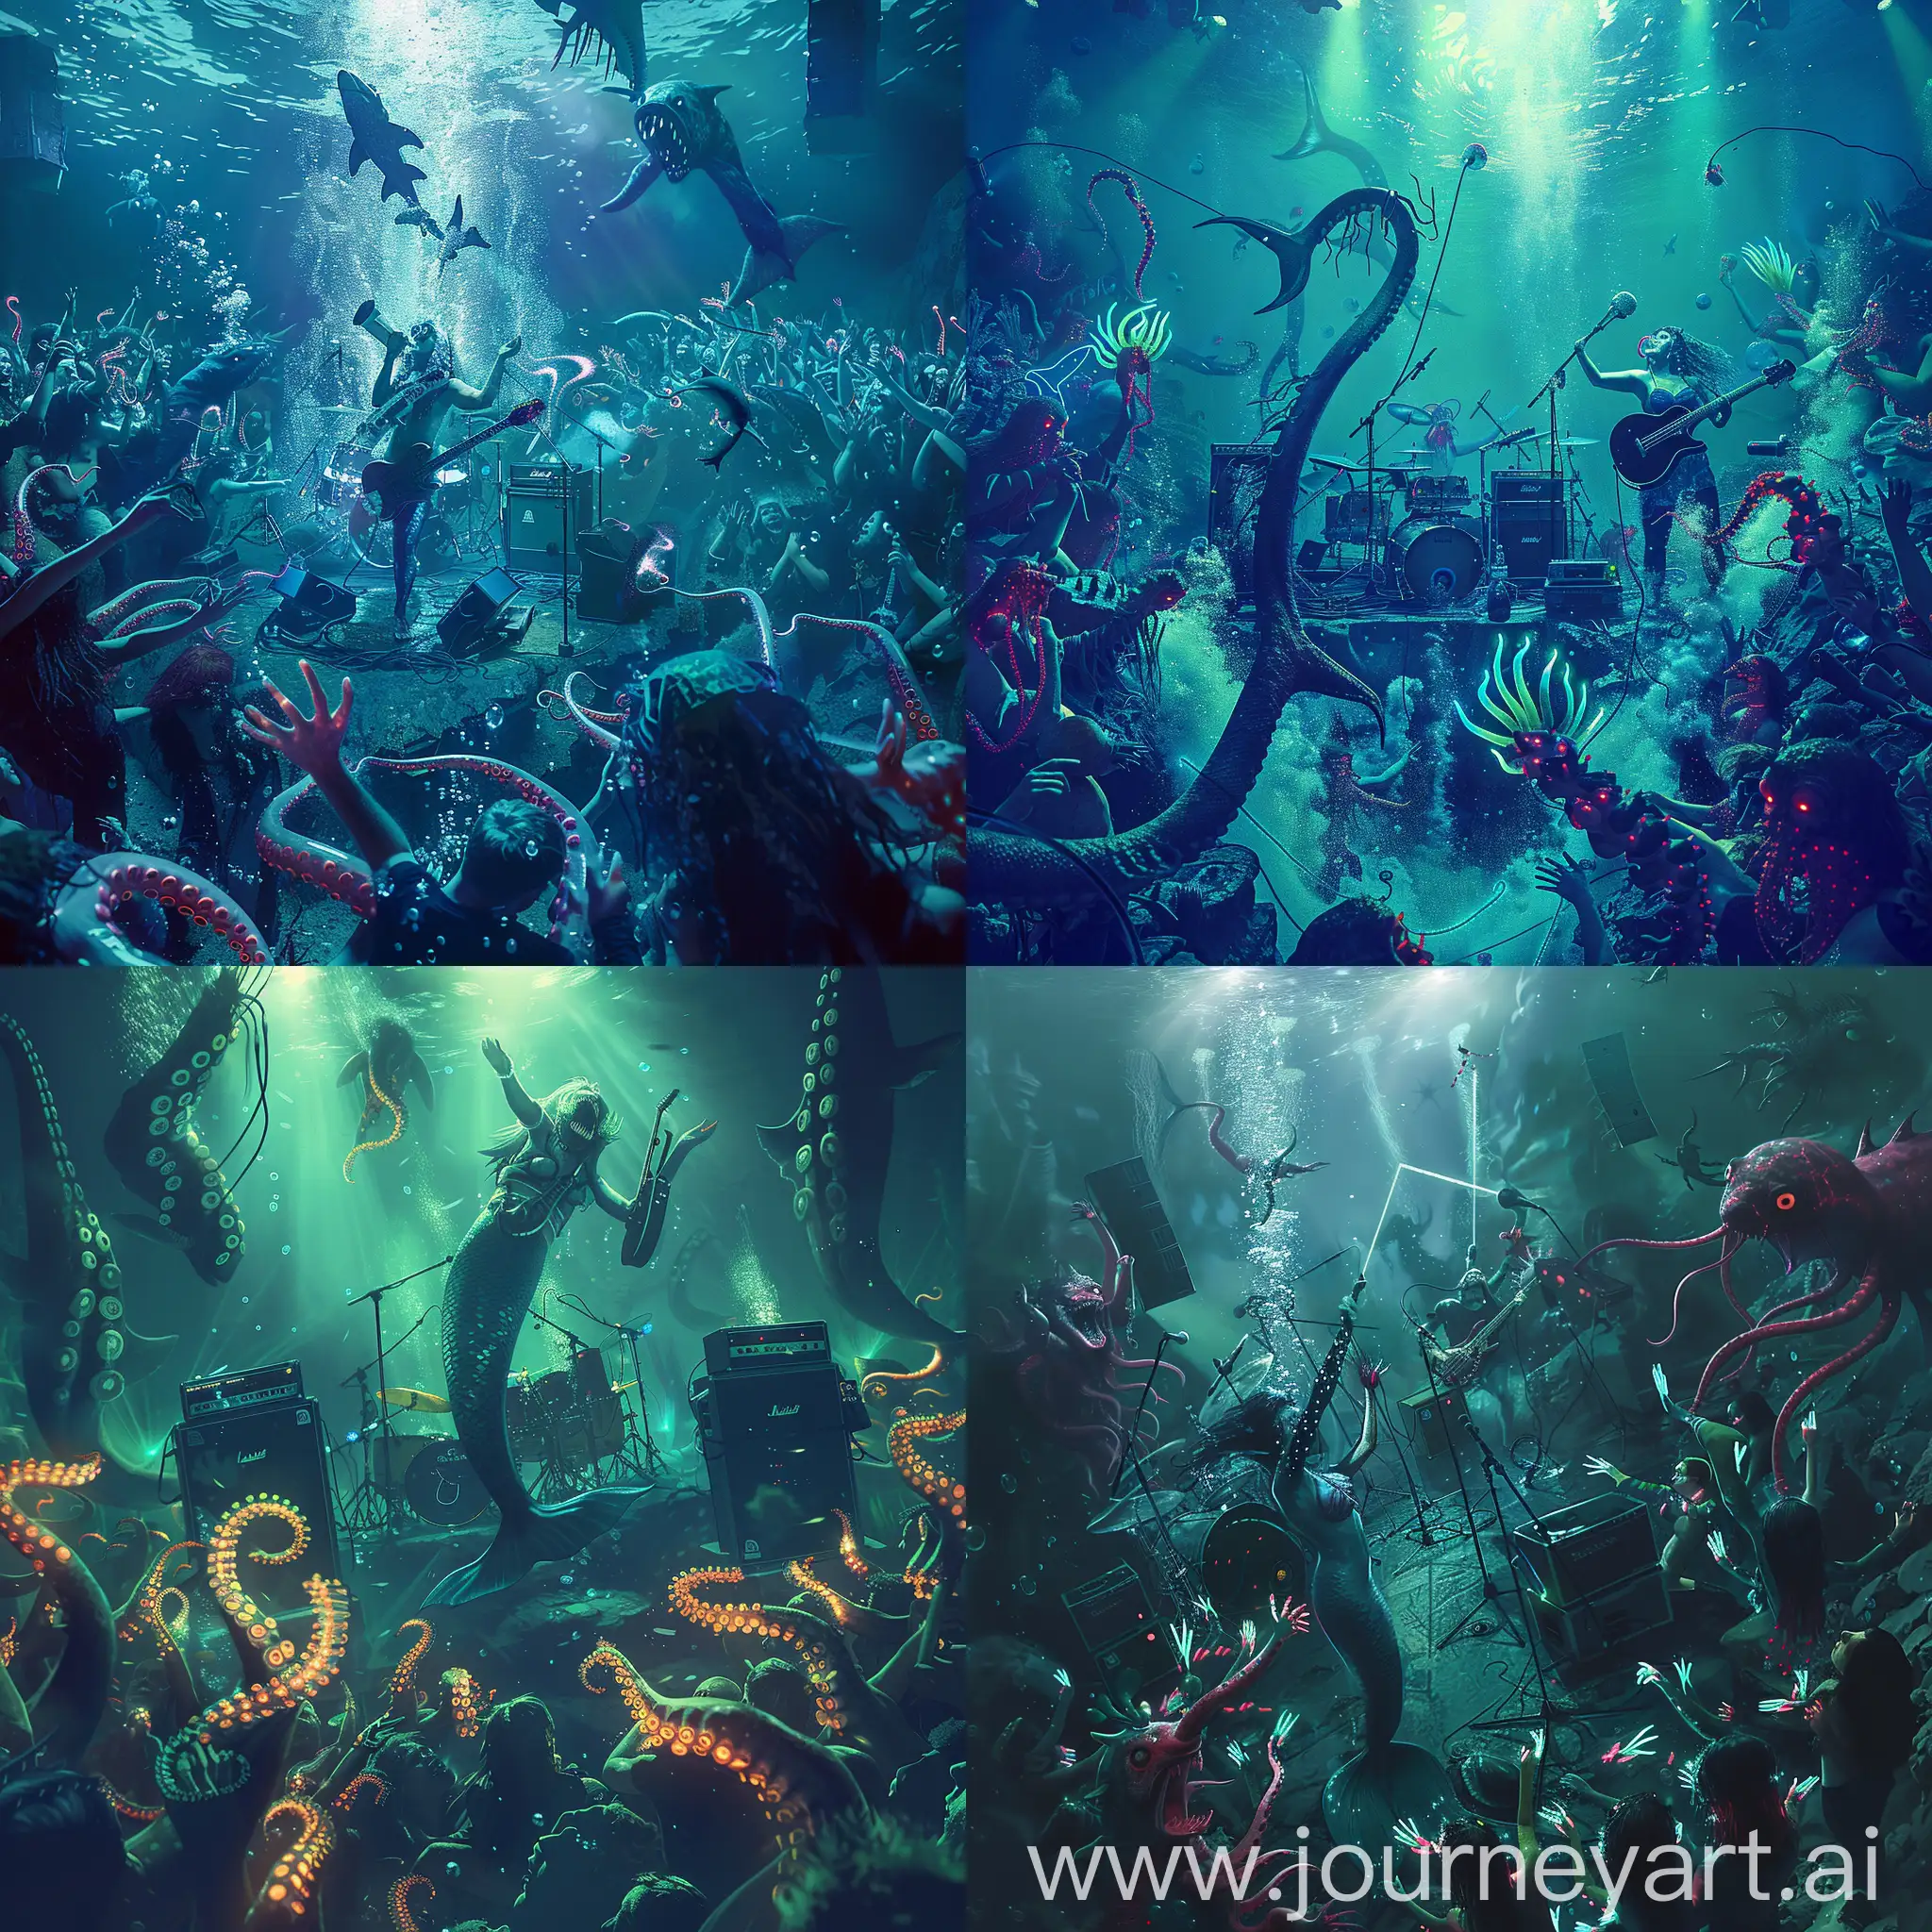 An underwater rock concert featuring a mermaid punk band, with electric eels powering the amps and a cheering crowd of sea creatures waving glow-in-the-dark tentacles, 4k, high contrast, edgy, realistic photo